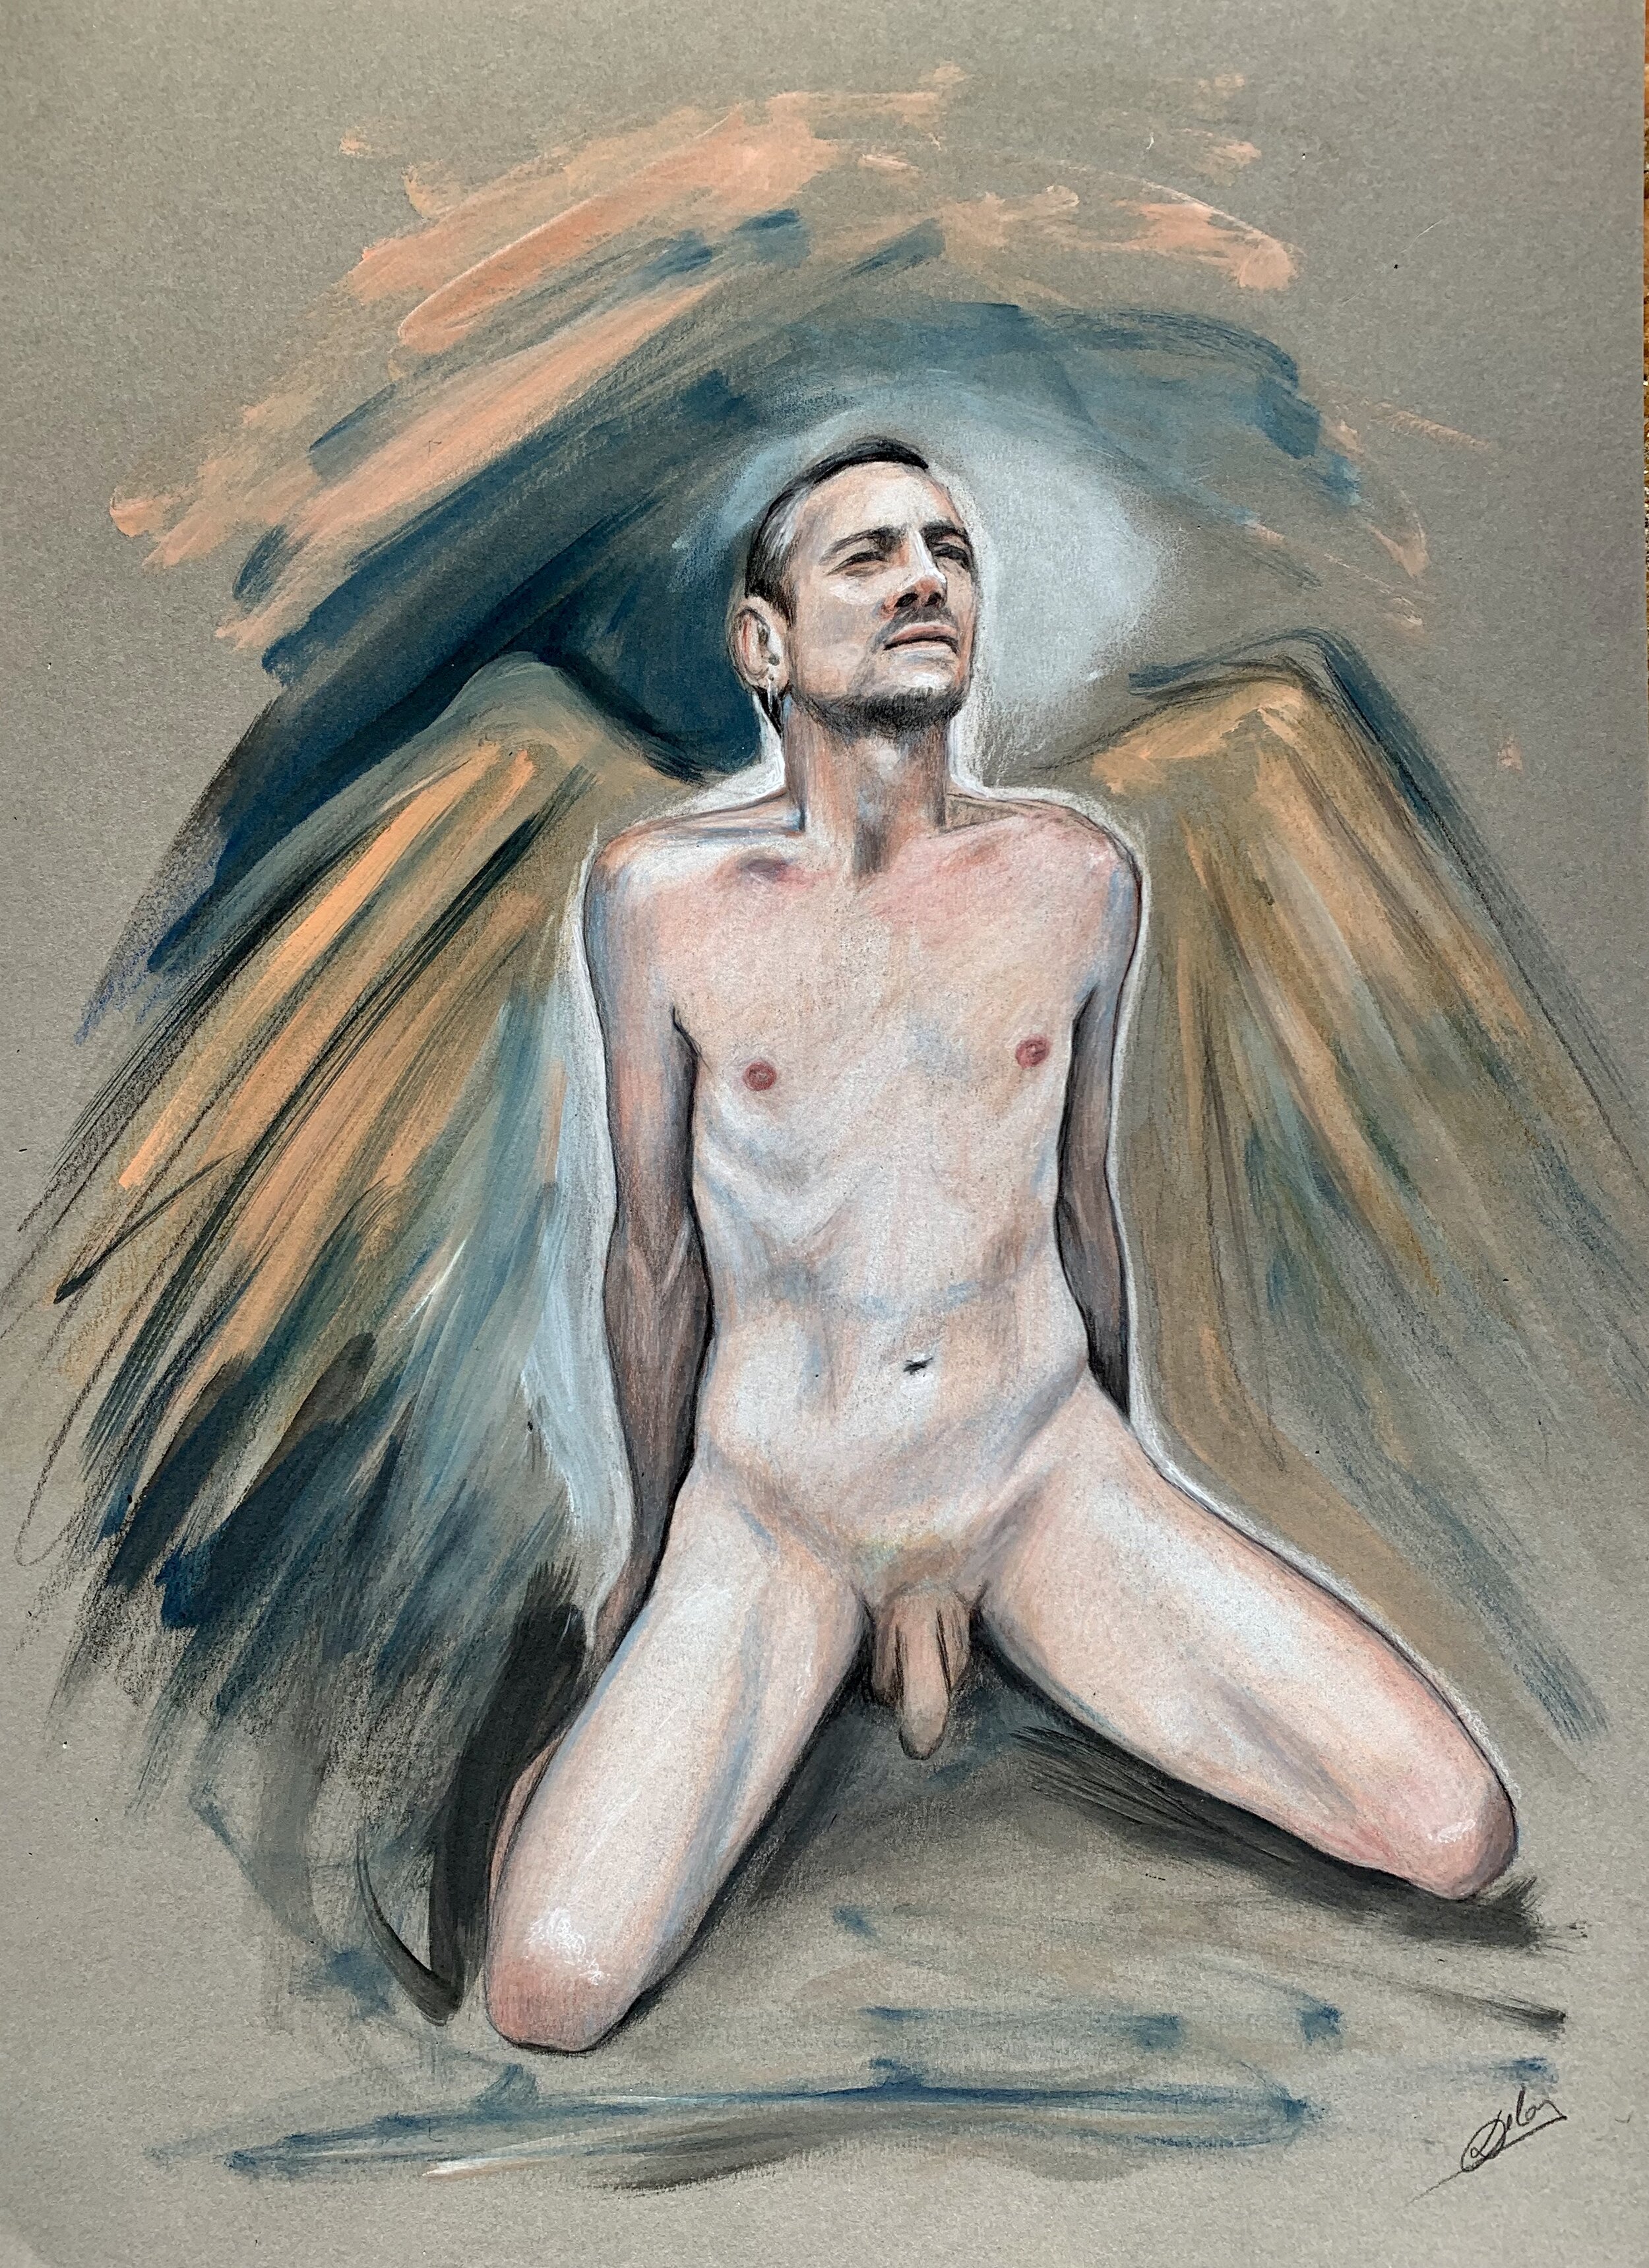 Nude Angel Study. Pastel and oil on gray paper 30 x 40 cm